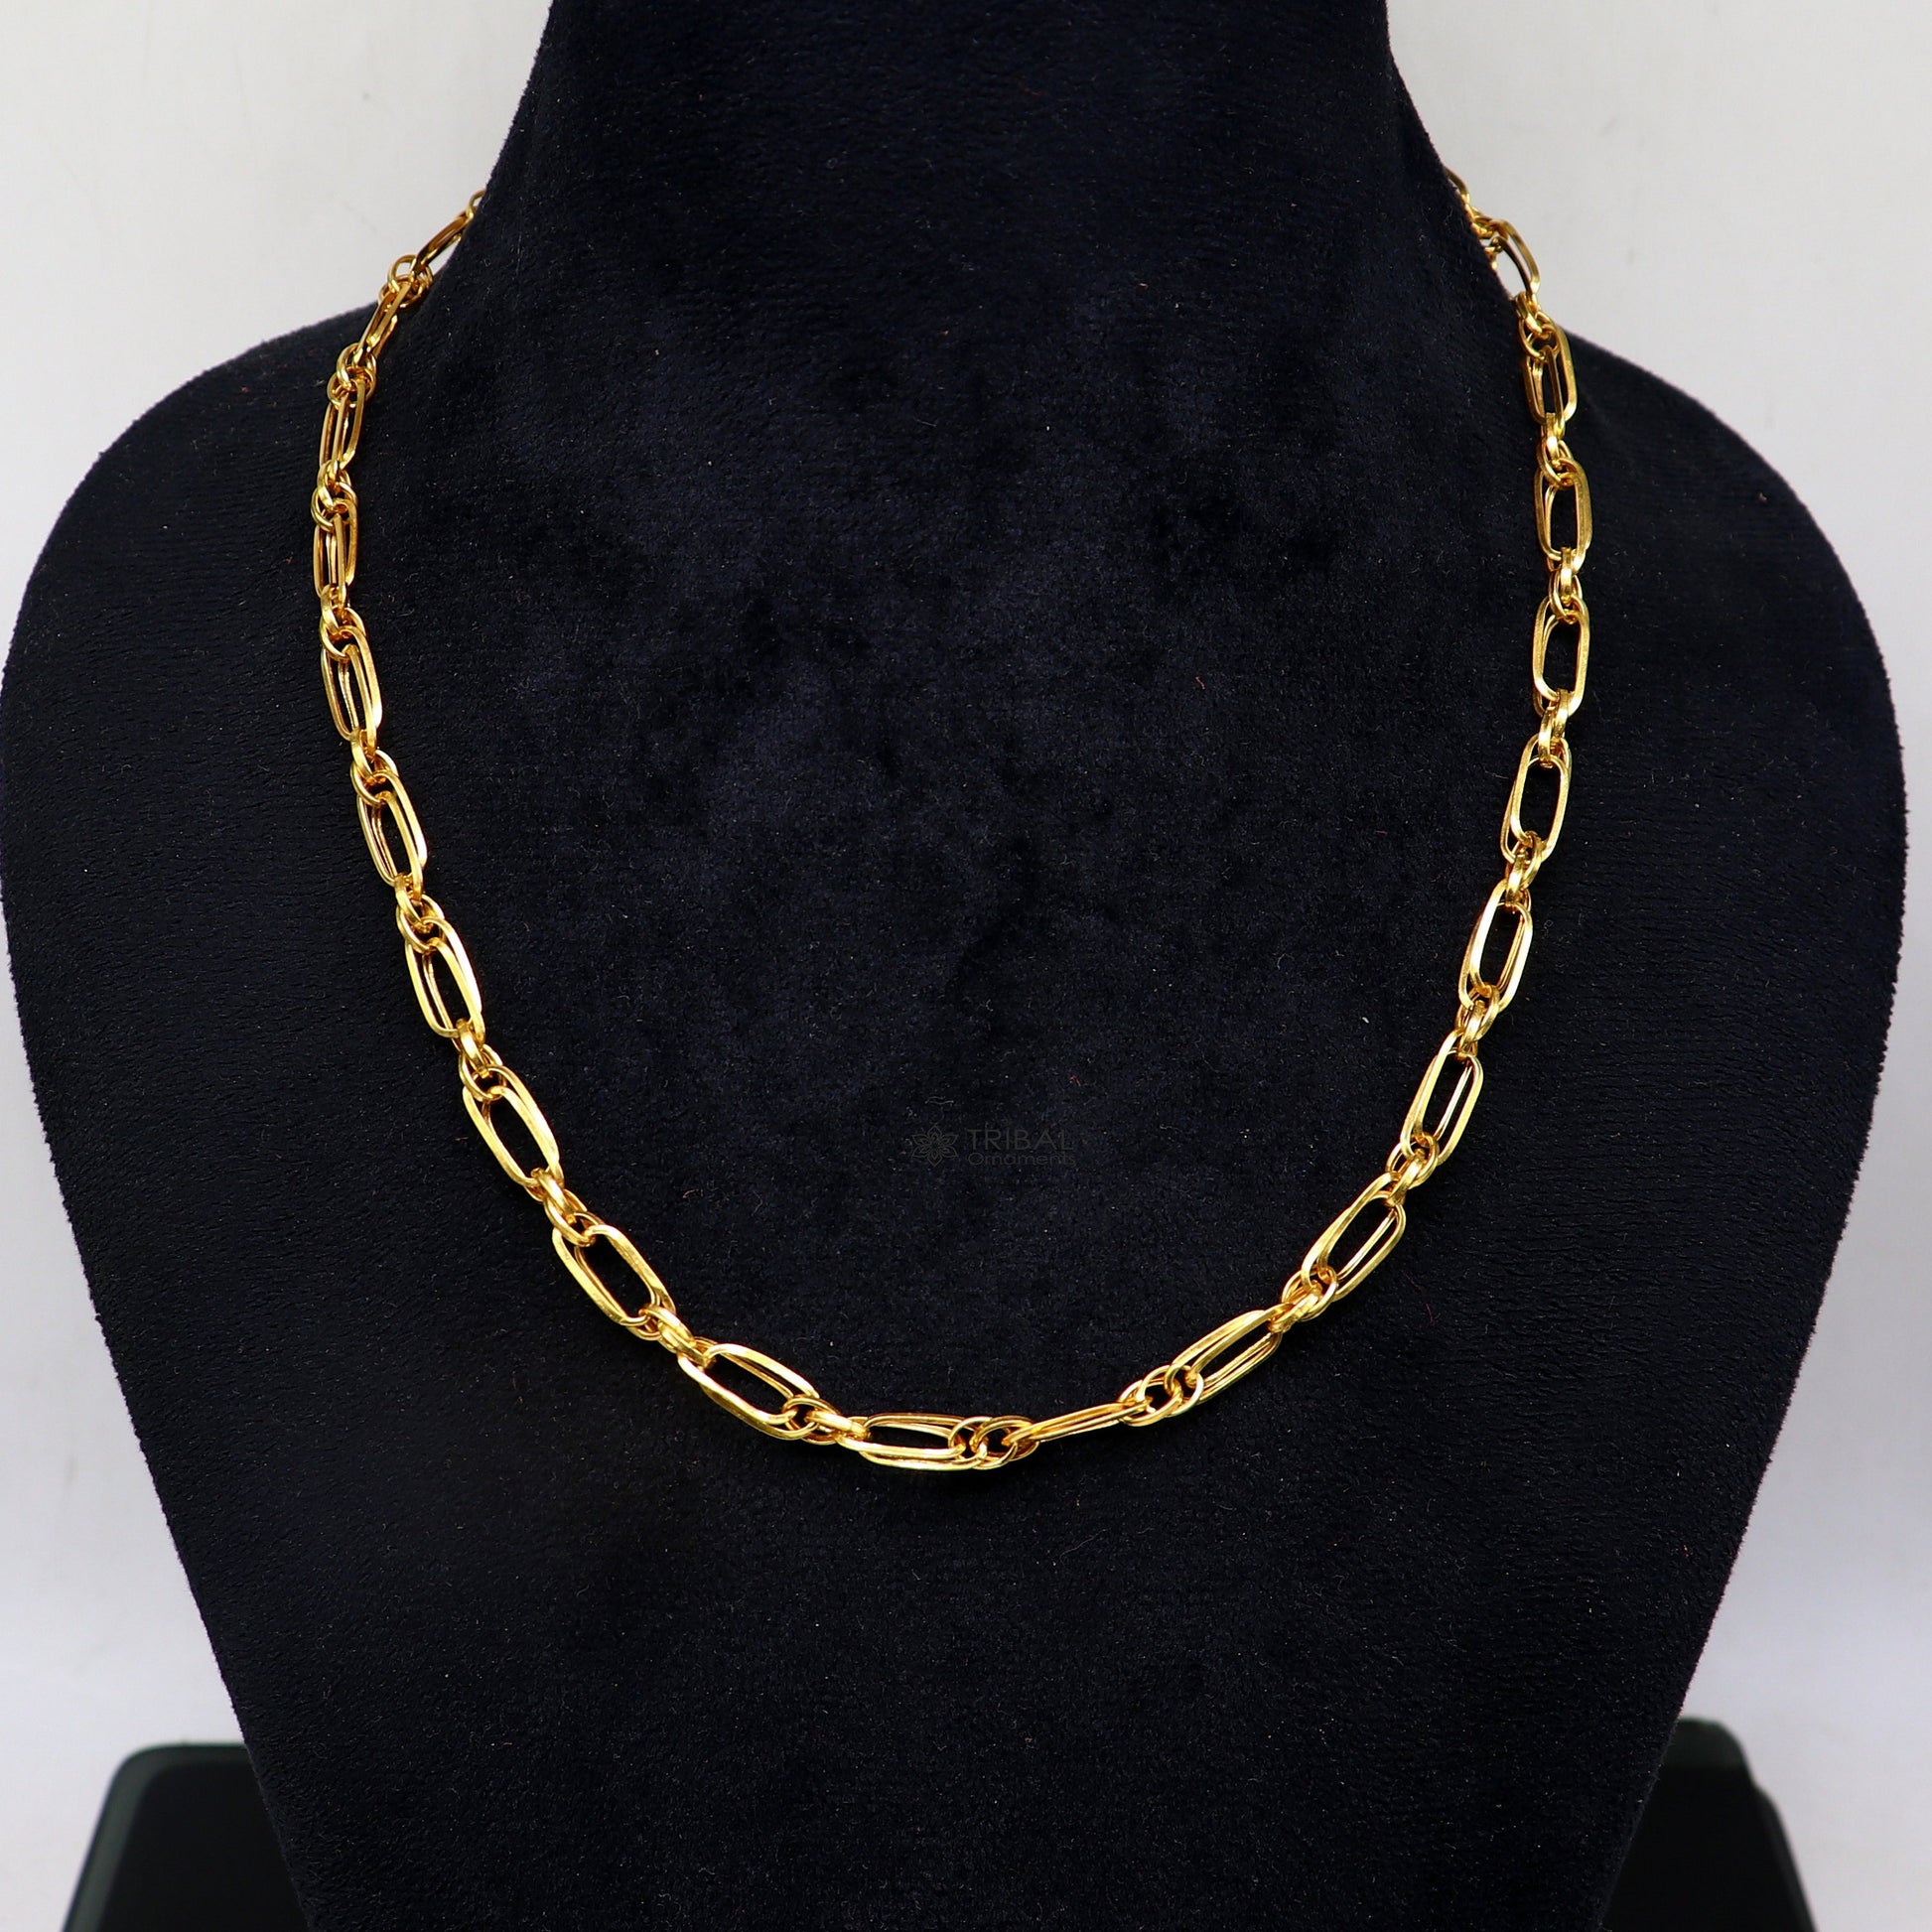 All sizes 22kt yellow gold certified Unisex chain necklace, best gifting customized indo link chain necklace fancy stylish jewelry ch572 - TRIBAL ORNAMENTS